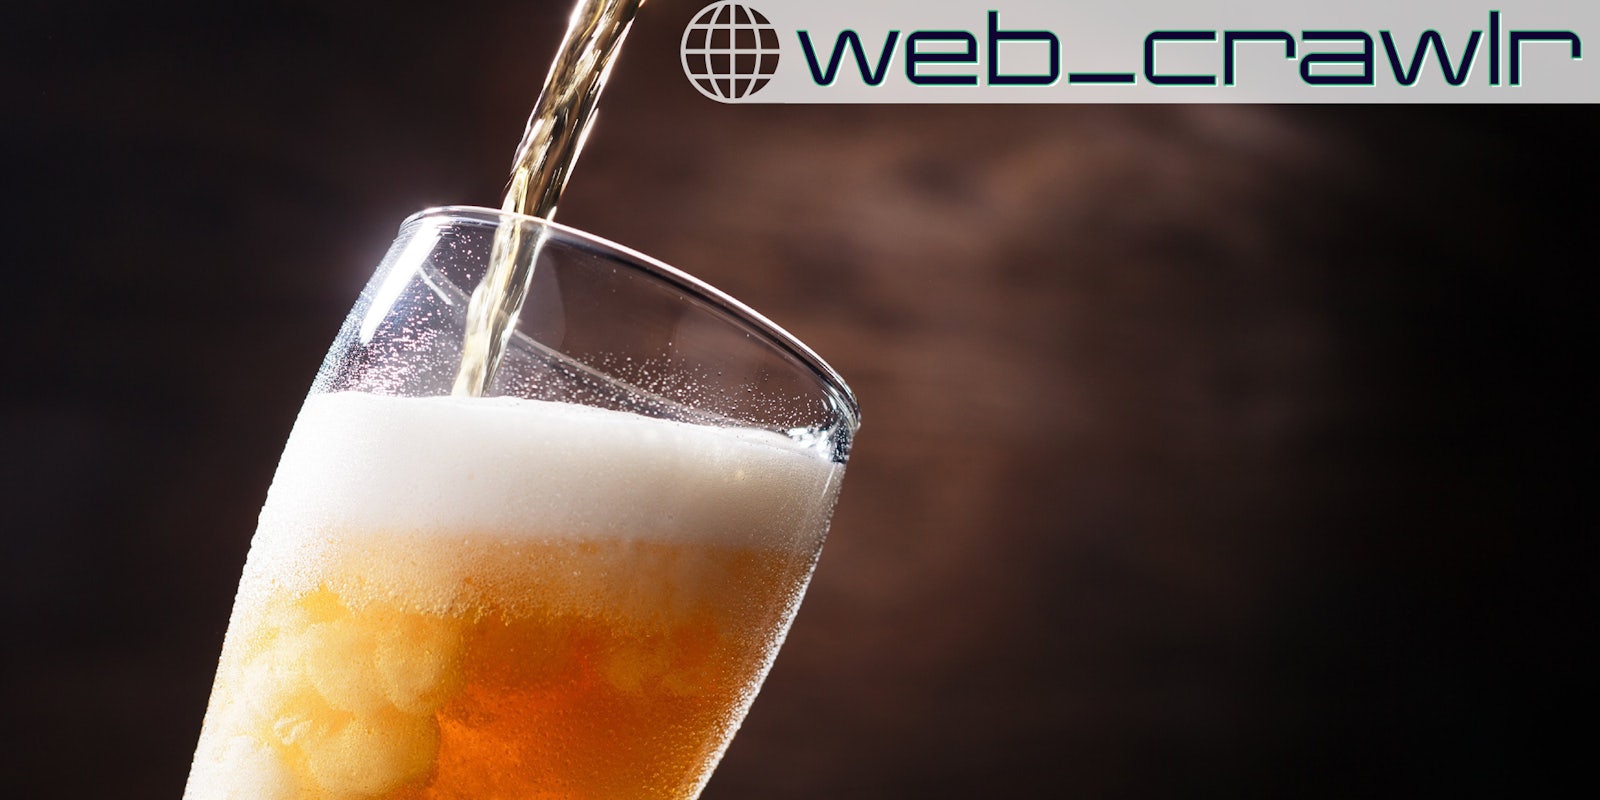 Beer being poured into a glass. The Daily Dot newsletter web_crawlr logo is in the top right corner.